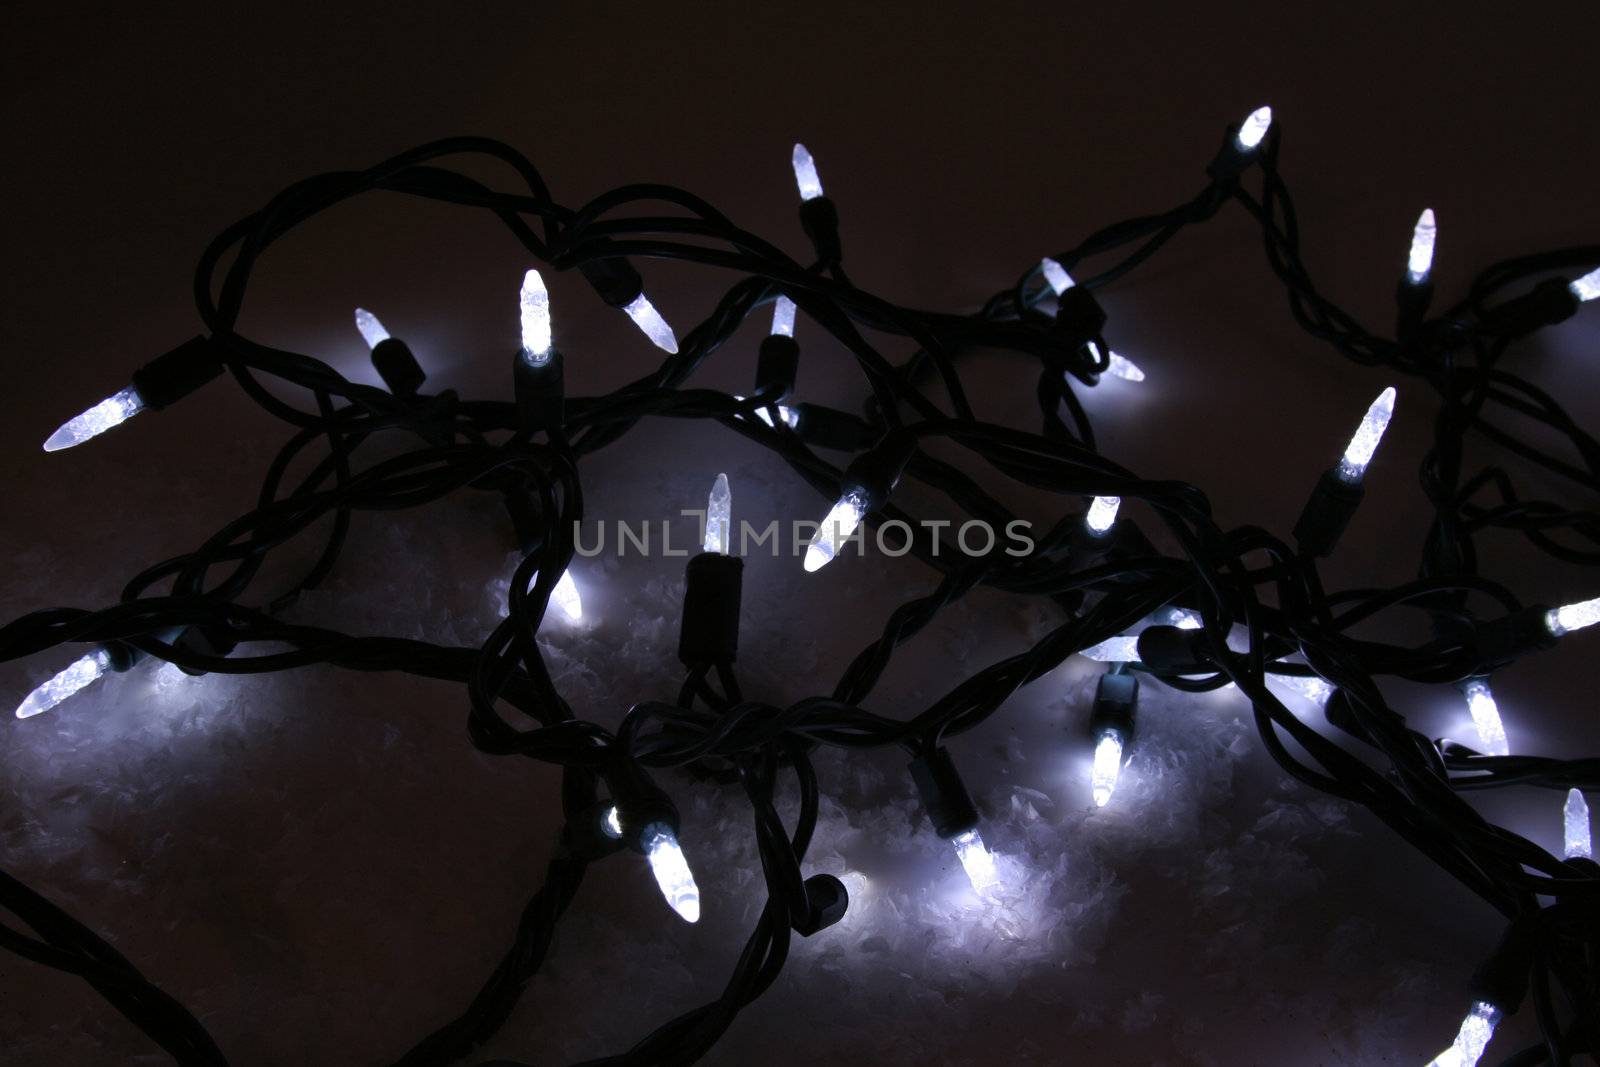 A string of white LED xmas lights.
